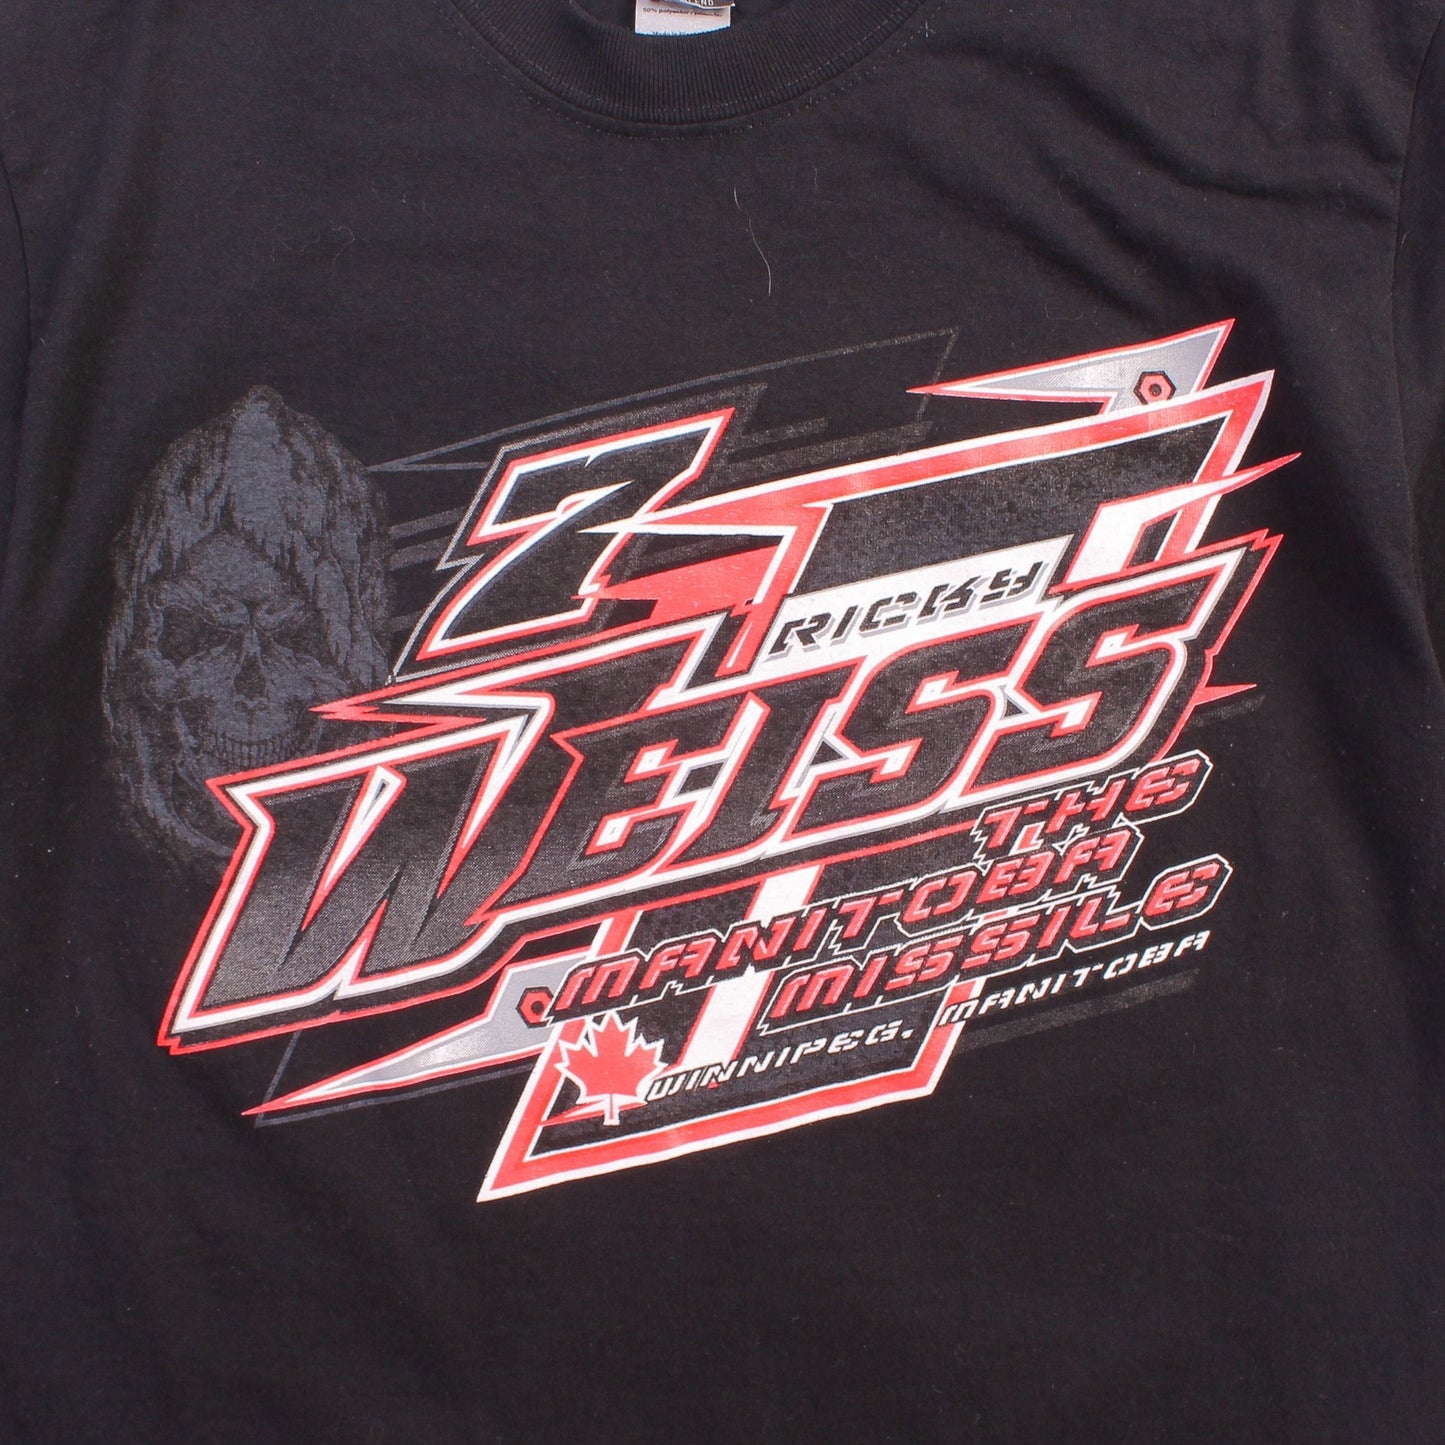 Vintage 'Ricky Weiss' T-Shirt - American Madness